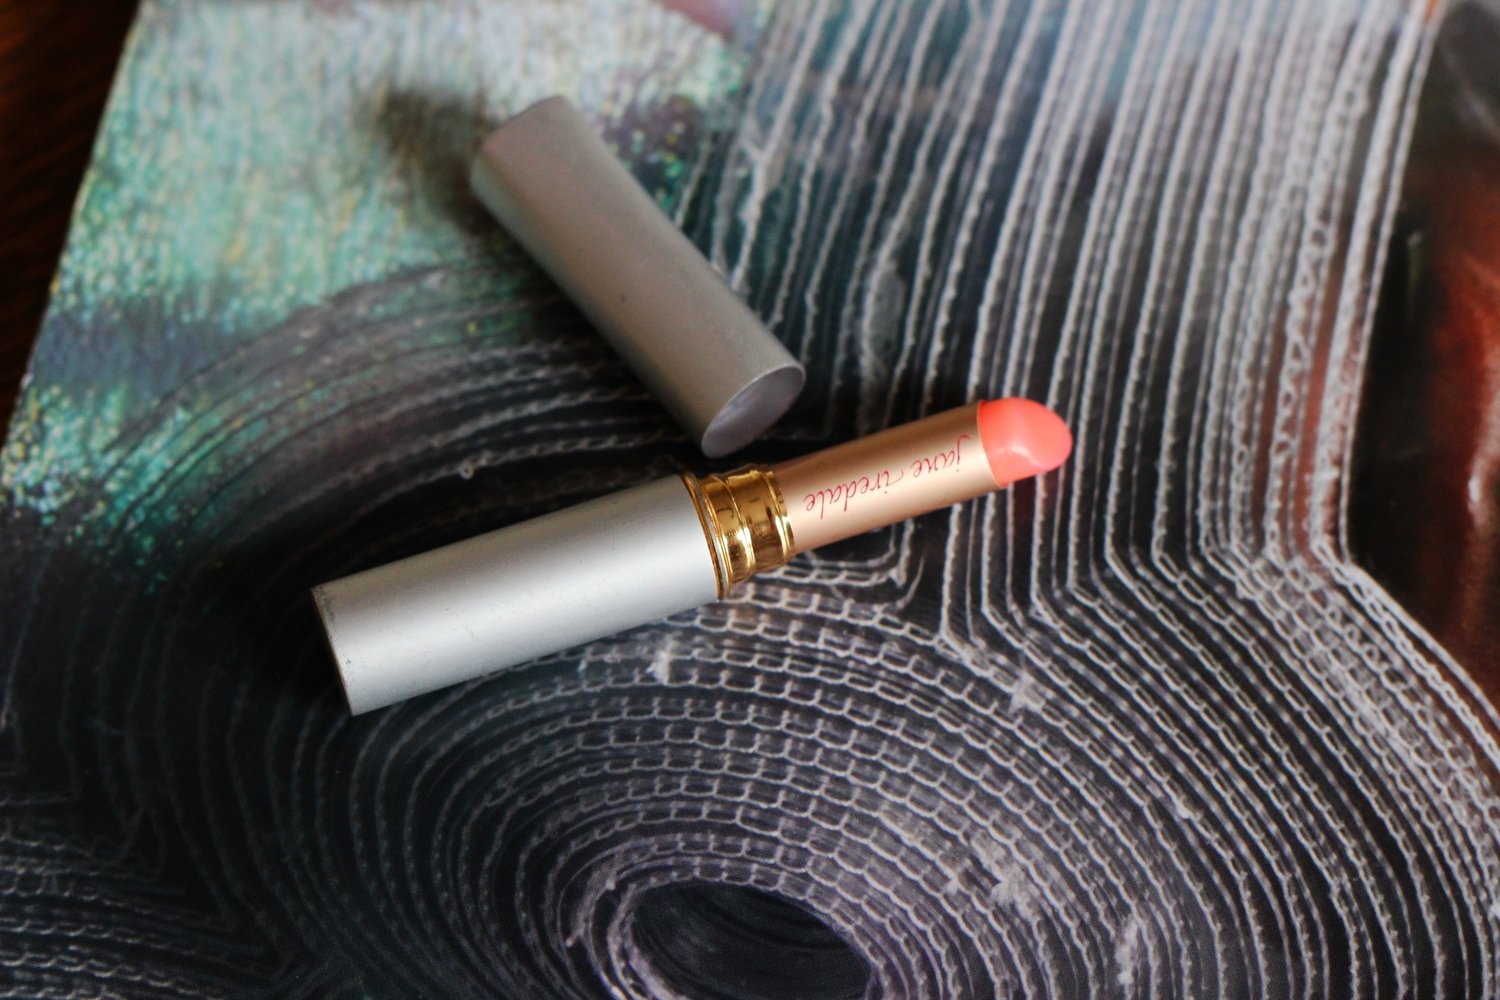 Jane Iredale lip and cheek stain is my favorite!